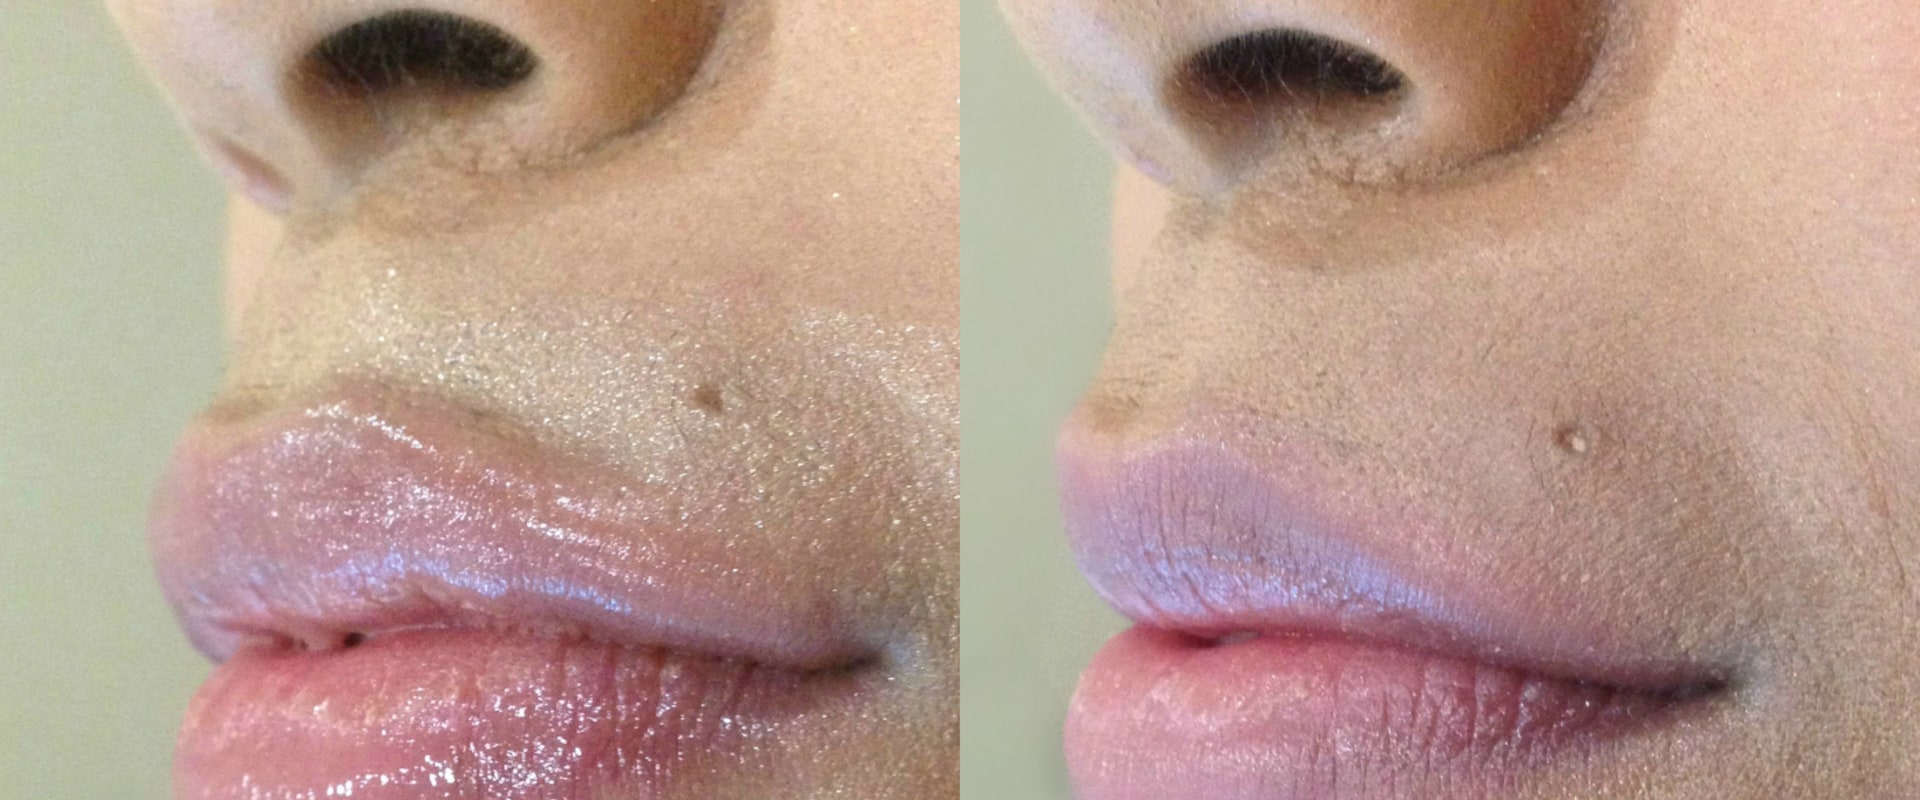 Why Do Juvederm Injections Cause Bumps and Lumps?